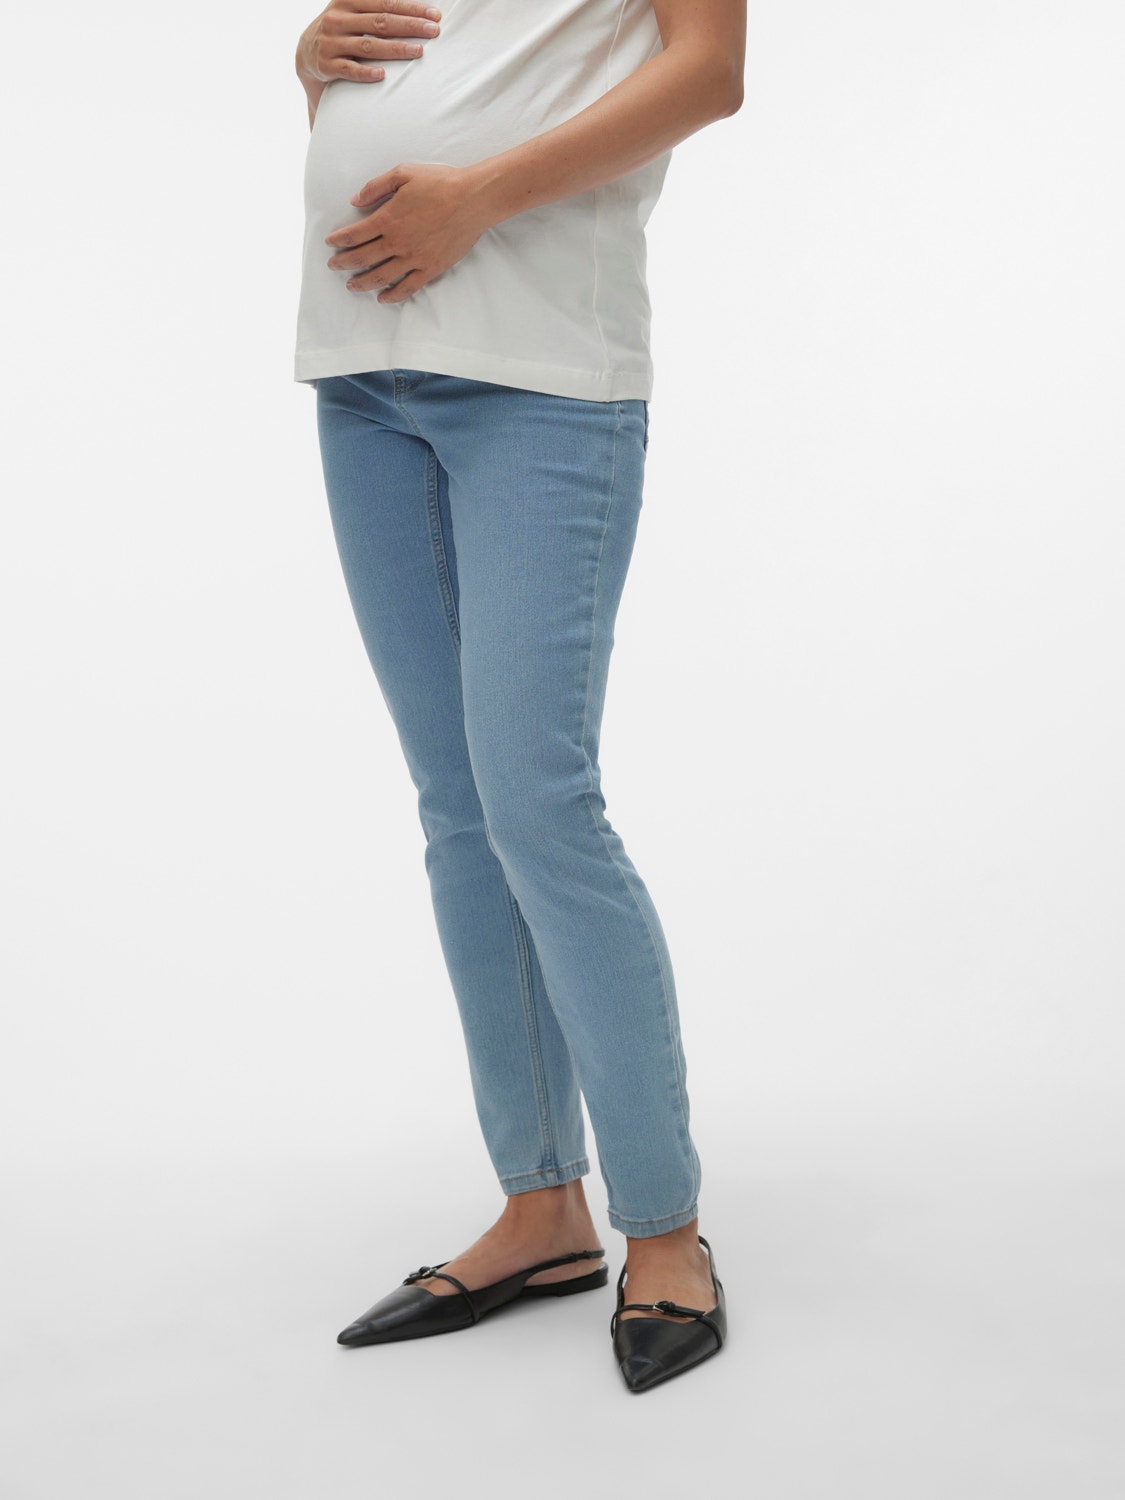 MAMA.LICIOUS Jeggings Skinny Fit Taille extra haute -Light Blue Denim - 20014930